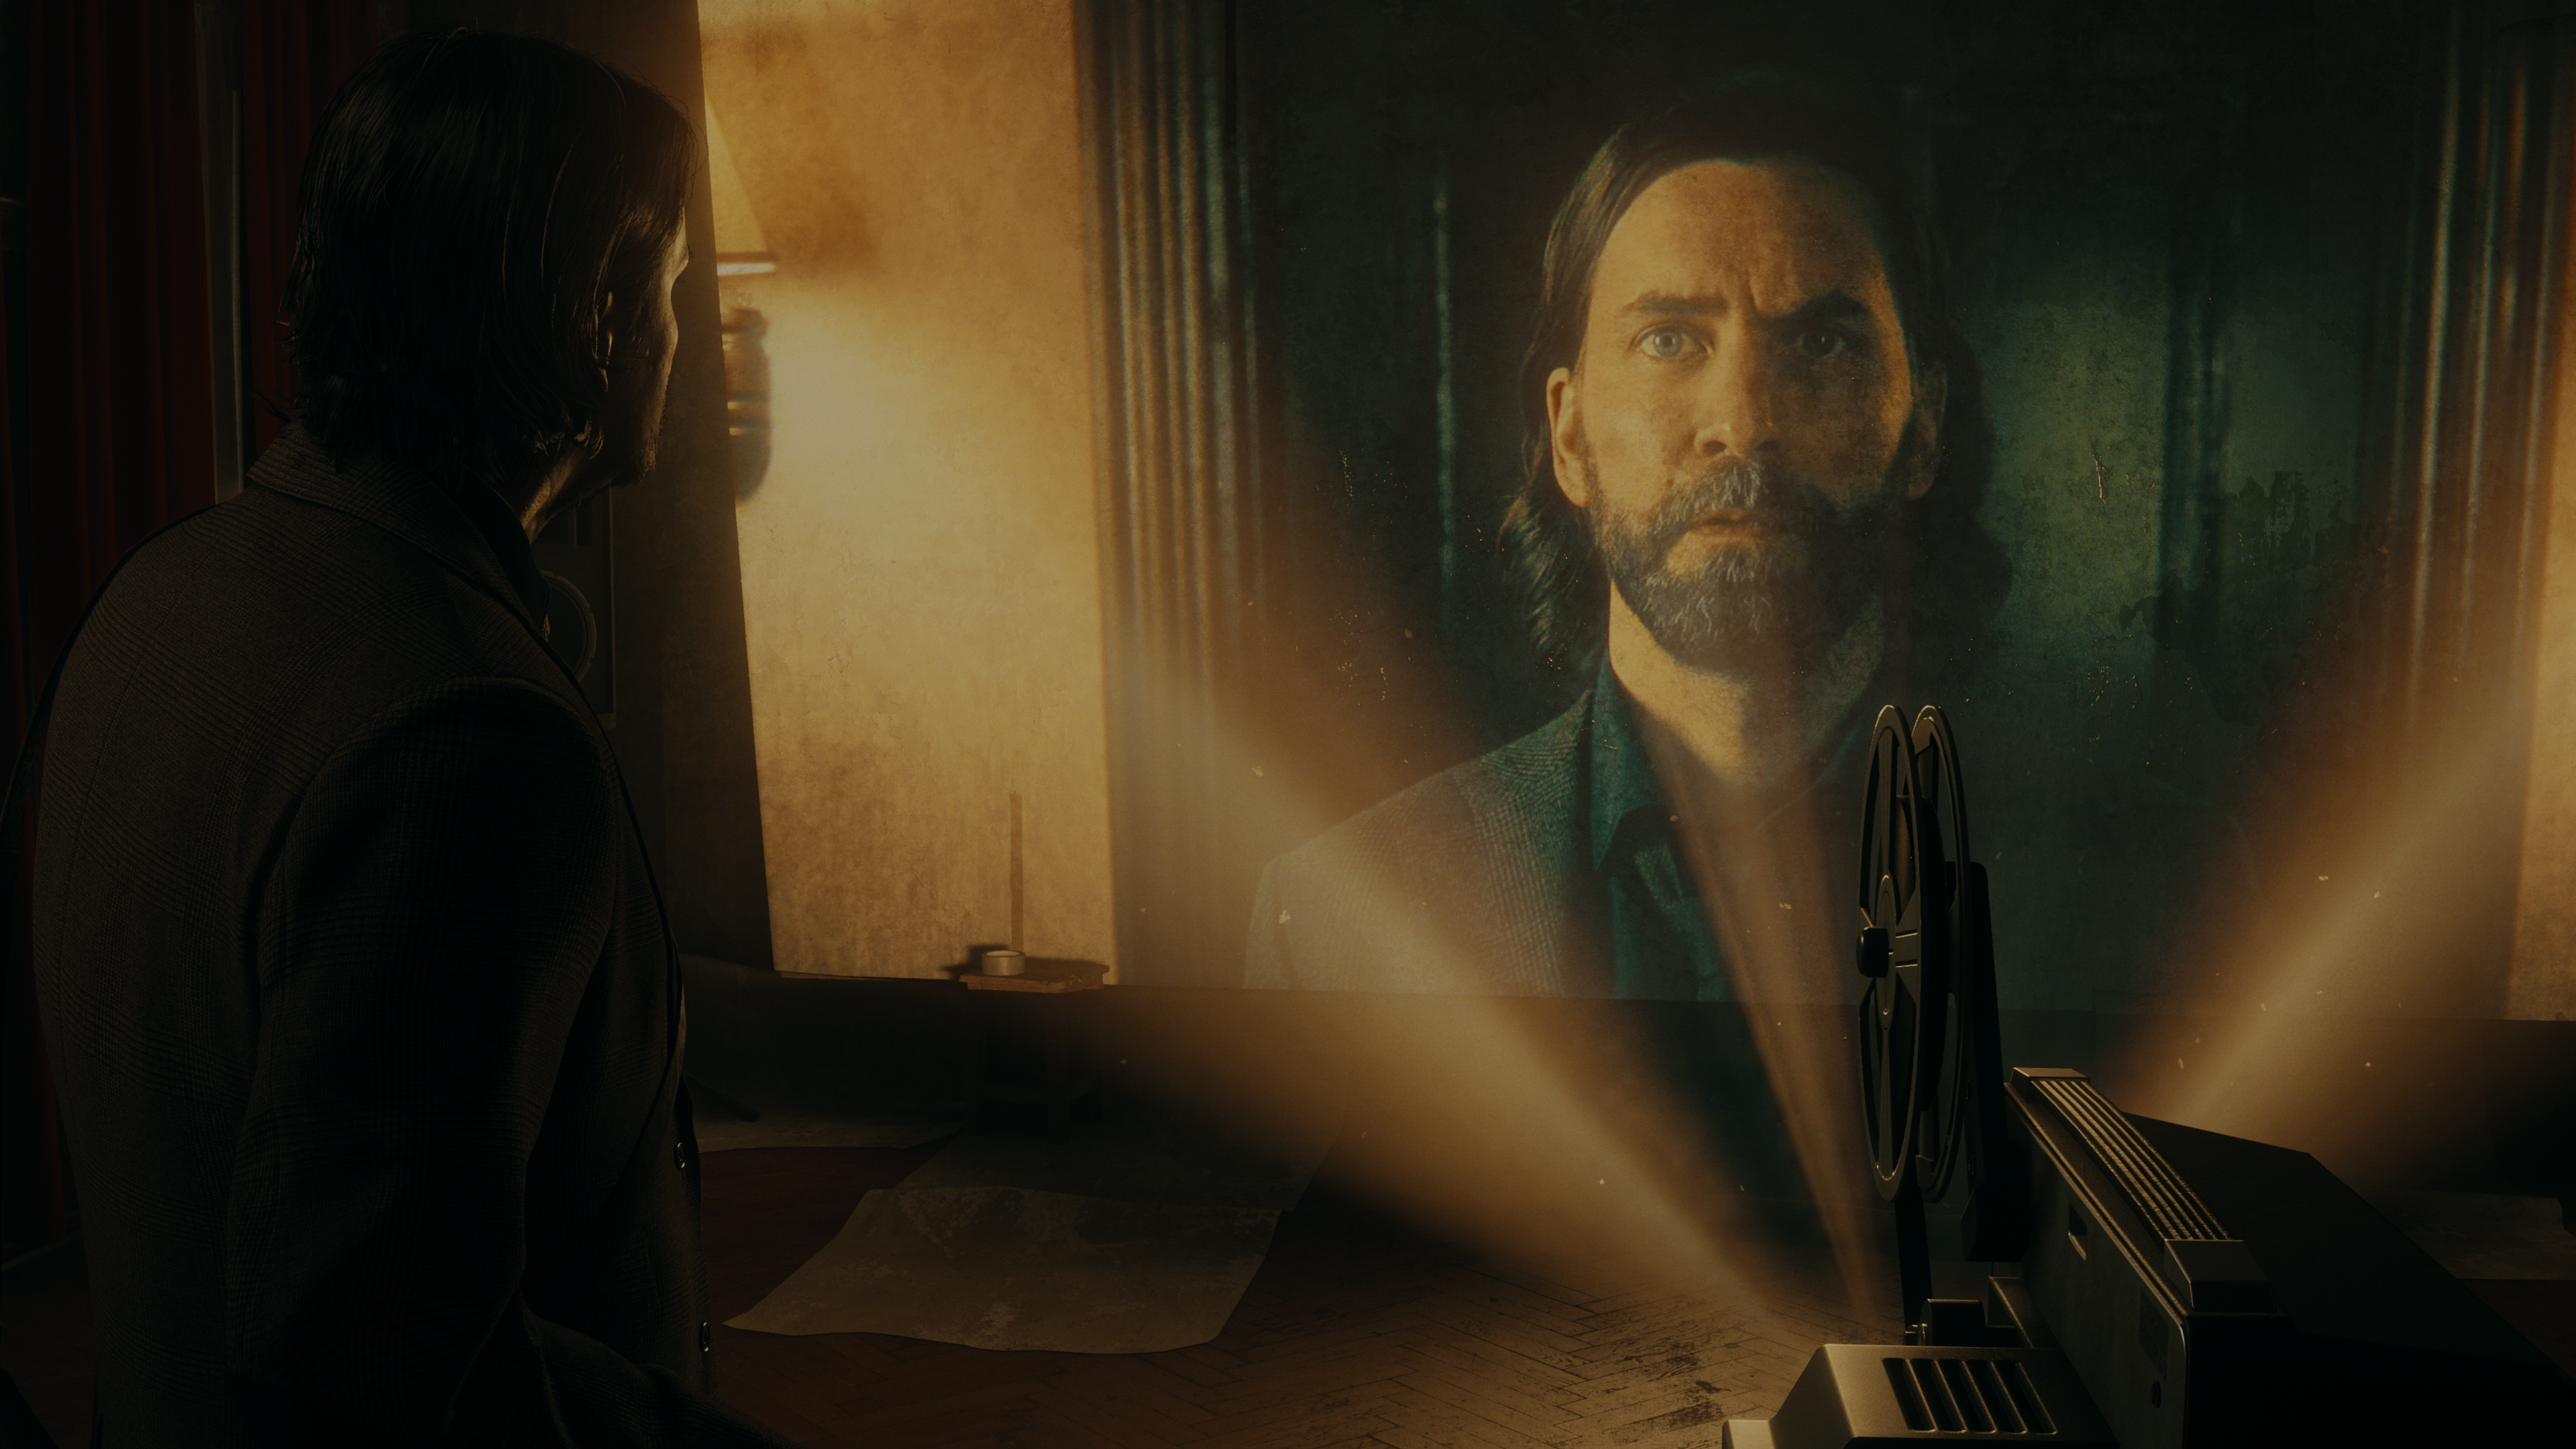 Stephen King gave the opening quote to Alan Wake for just one